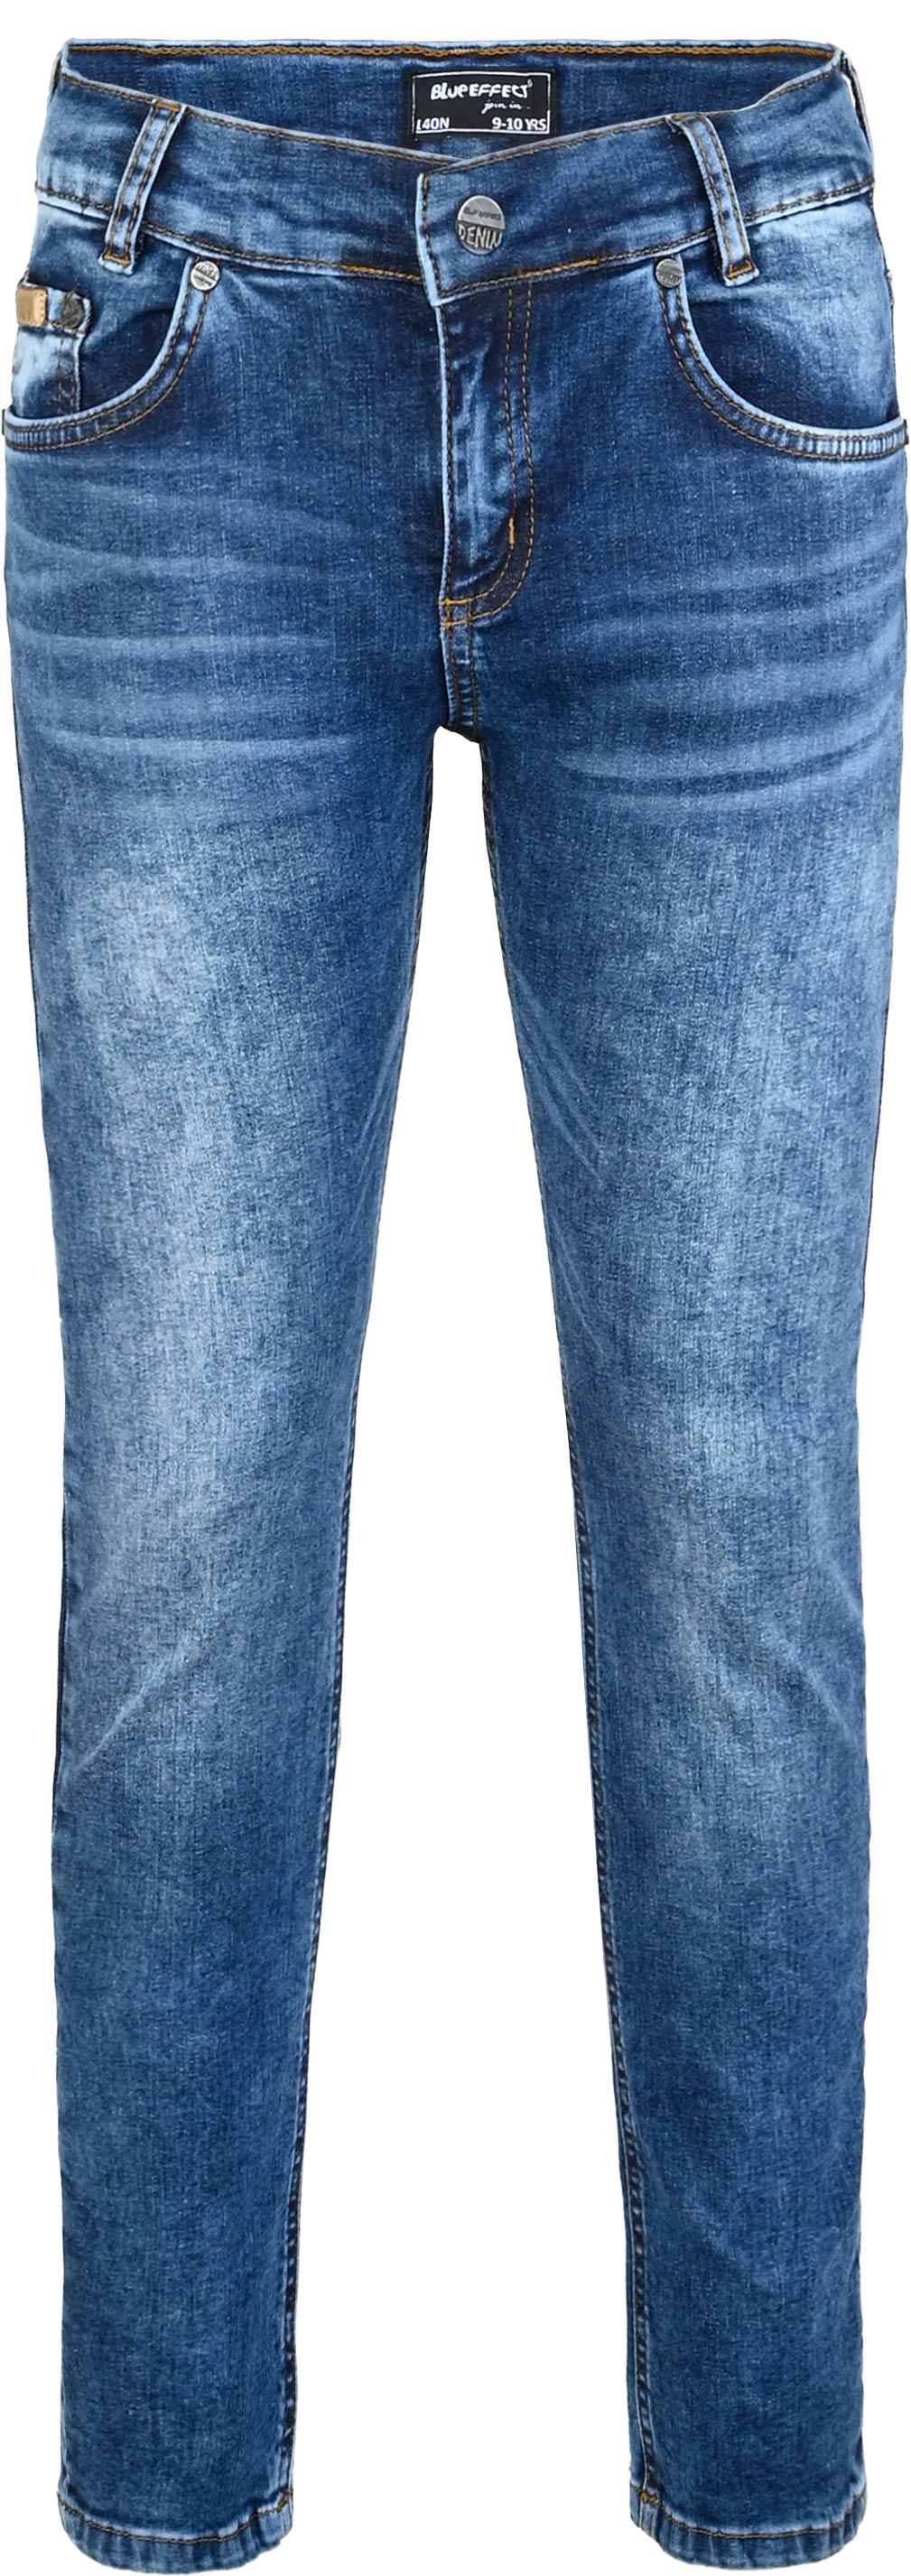 2833-Boys Relaxed Fit Jeans available in Slim,Normal,Wide